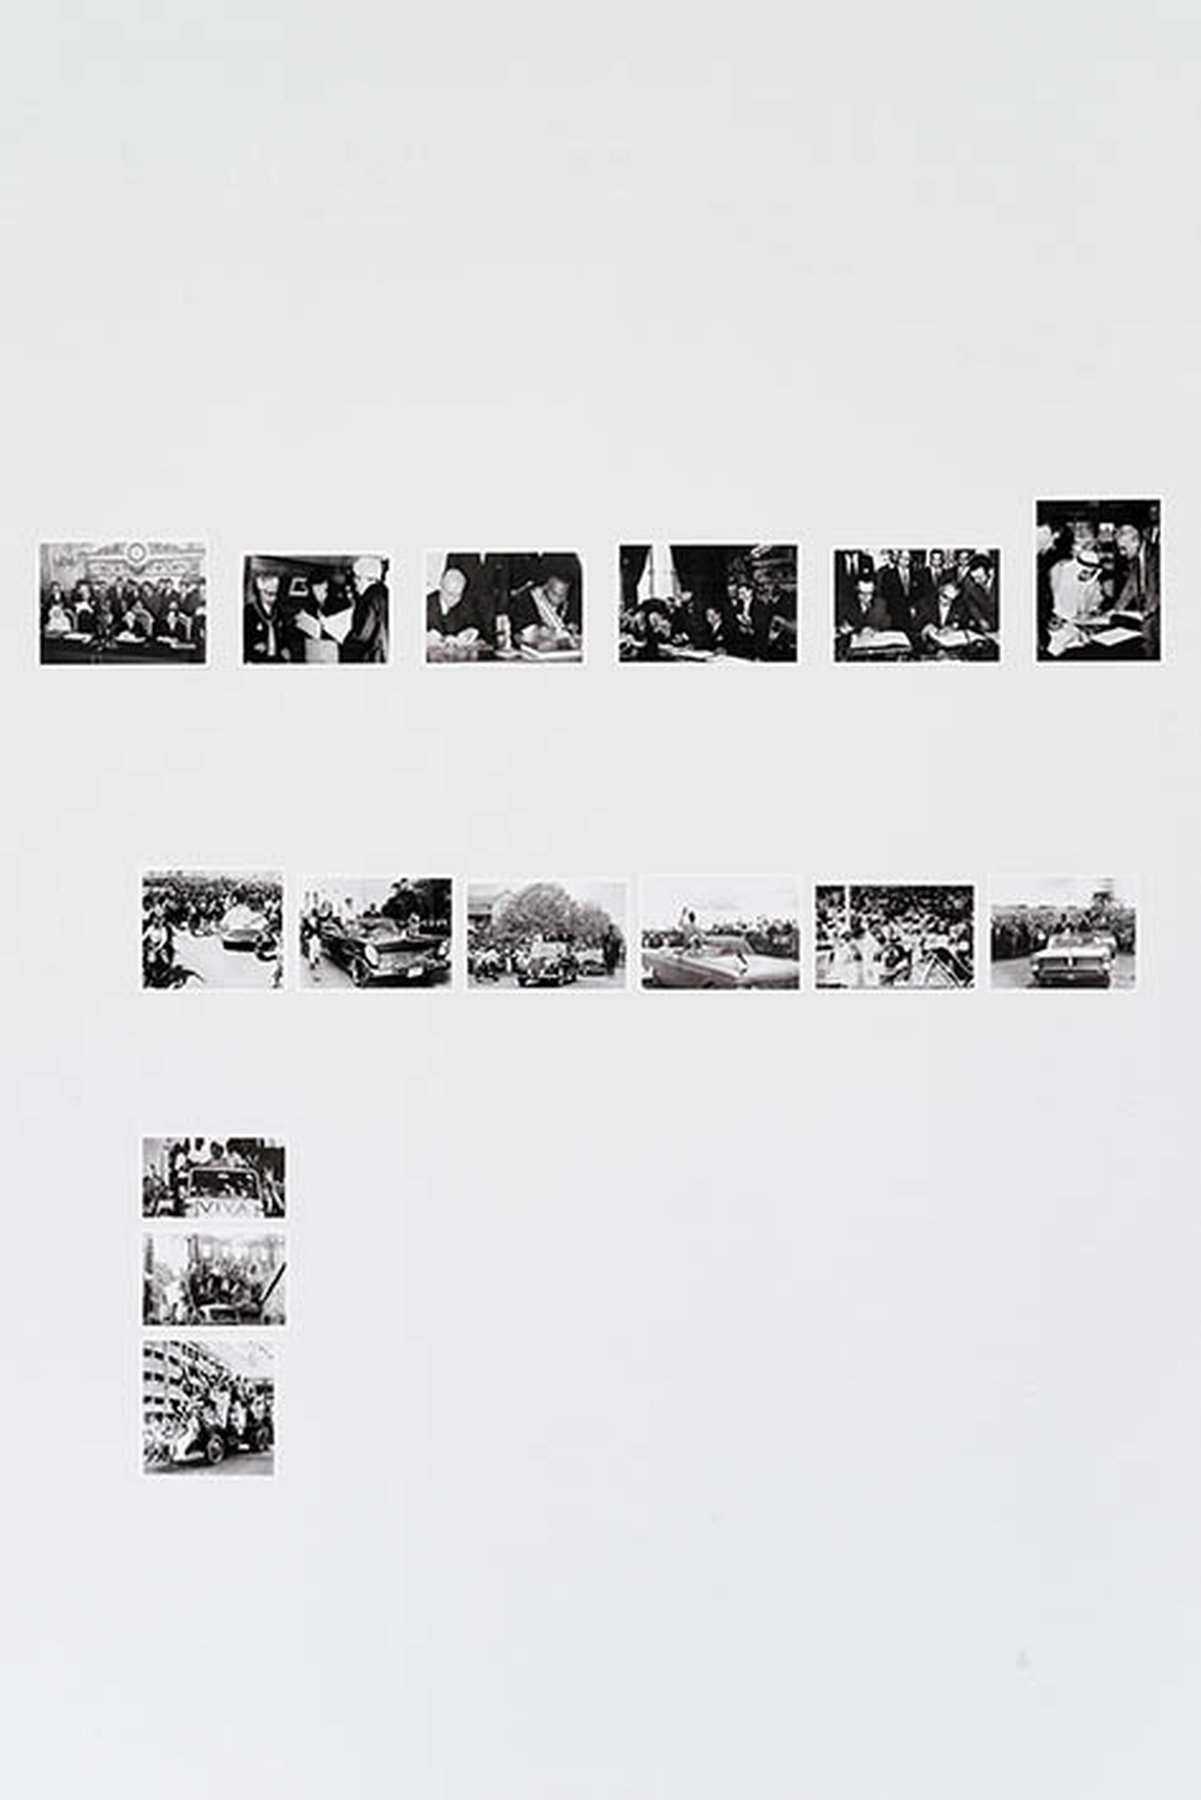 Independence Day 1934-1975, 2009-... 60+ black & white photos, each photo approximately about A5 size (14.8 x 21 cm), archival inkjet prints